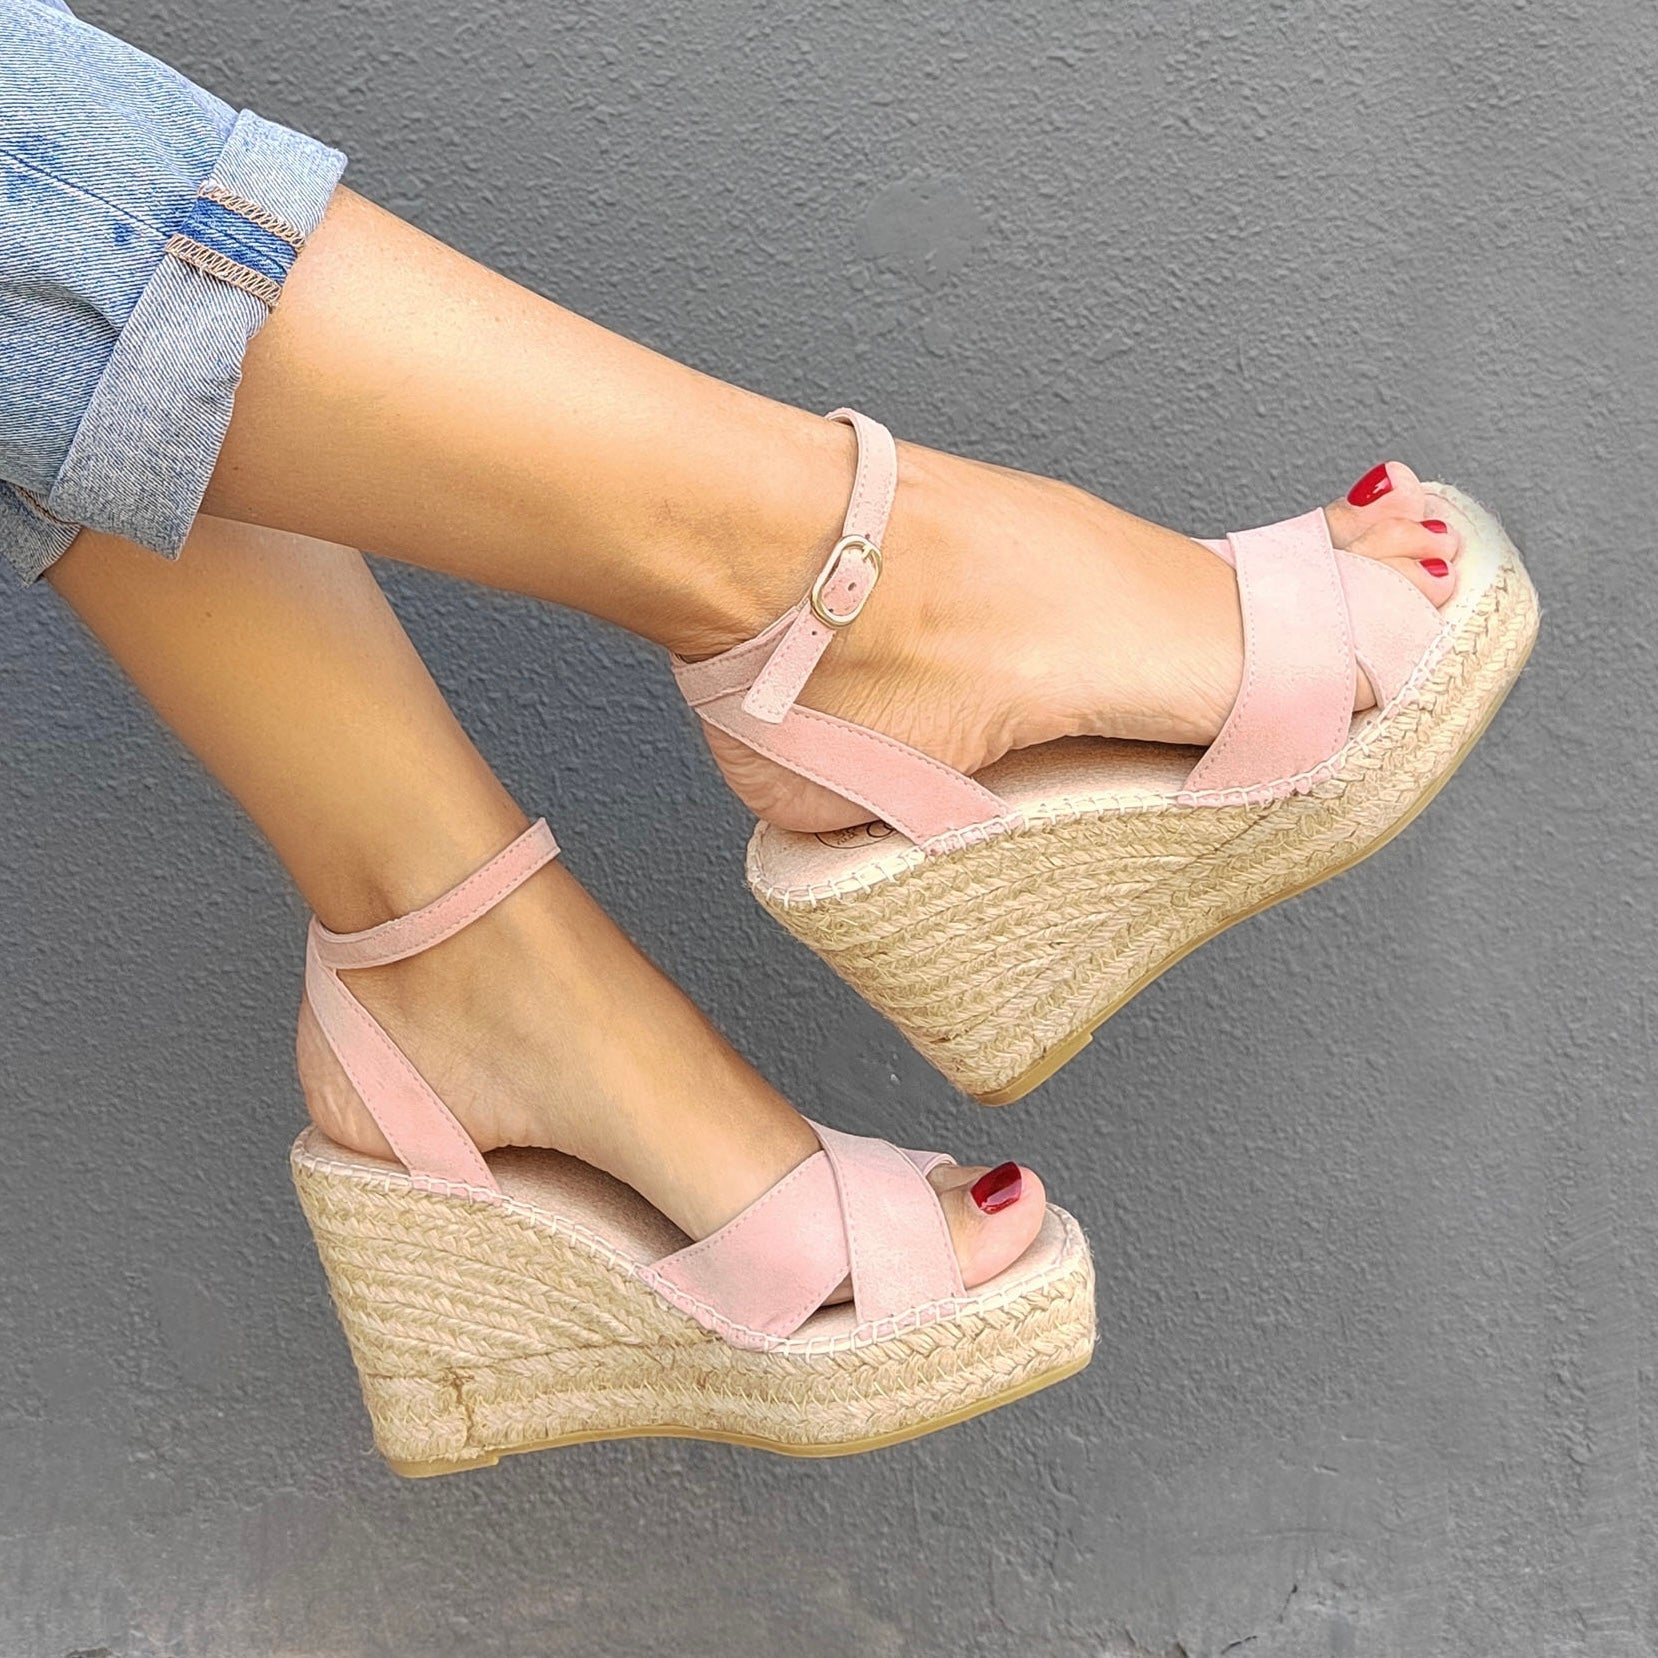 Lucia Espadrille Wedge in Rose - Shoeq